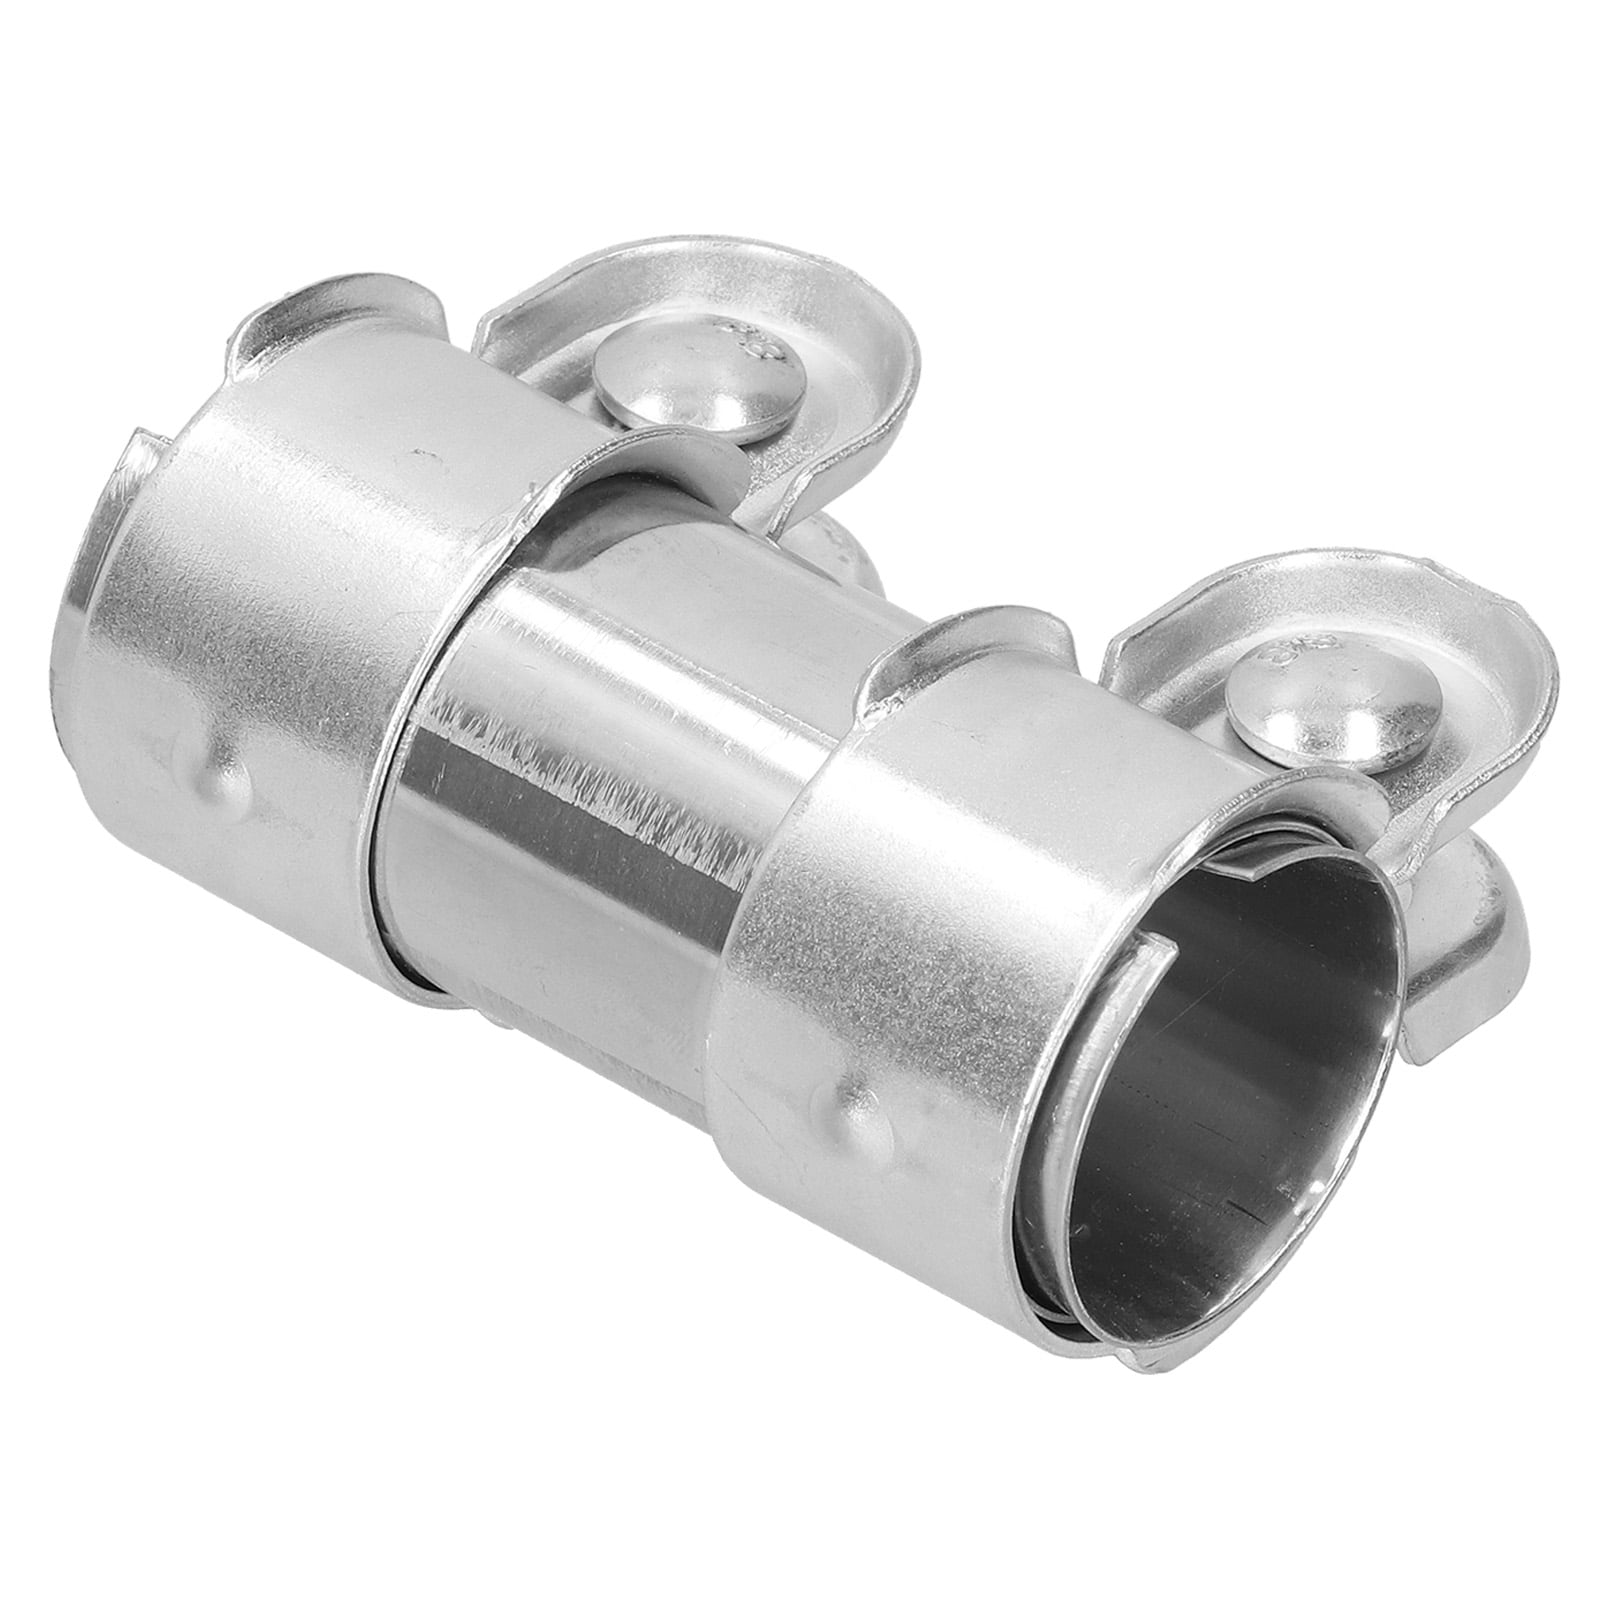 Universal 1.4in Stainless Steel Exhaust Pipe Clamp Exhaust Pipe Connector Sleeve Joiner Double Clamp Sleeve Band Butt Joint 3.7in Length Exhaust Pipe Clamp 